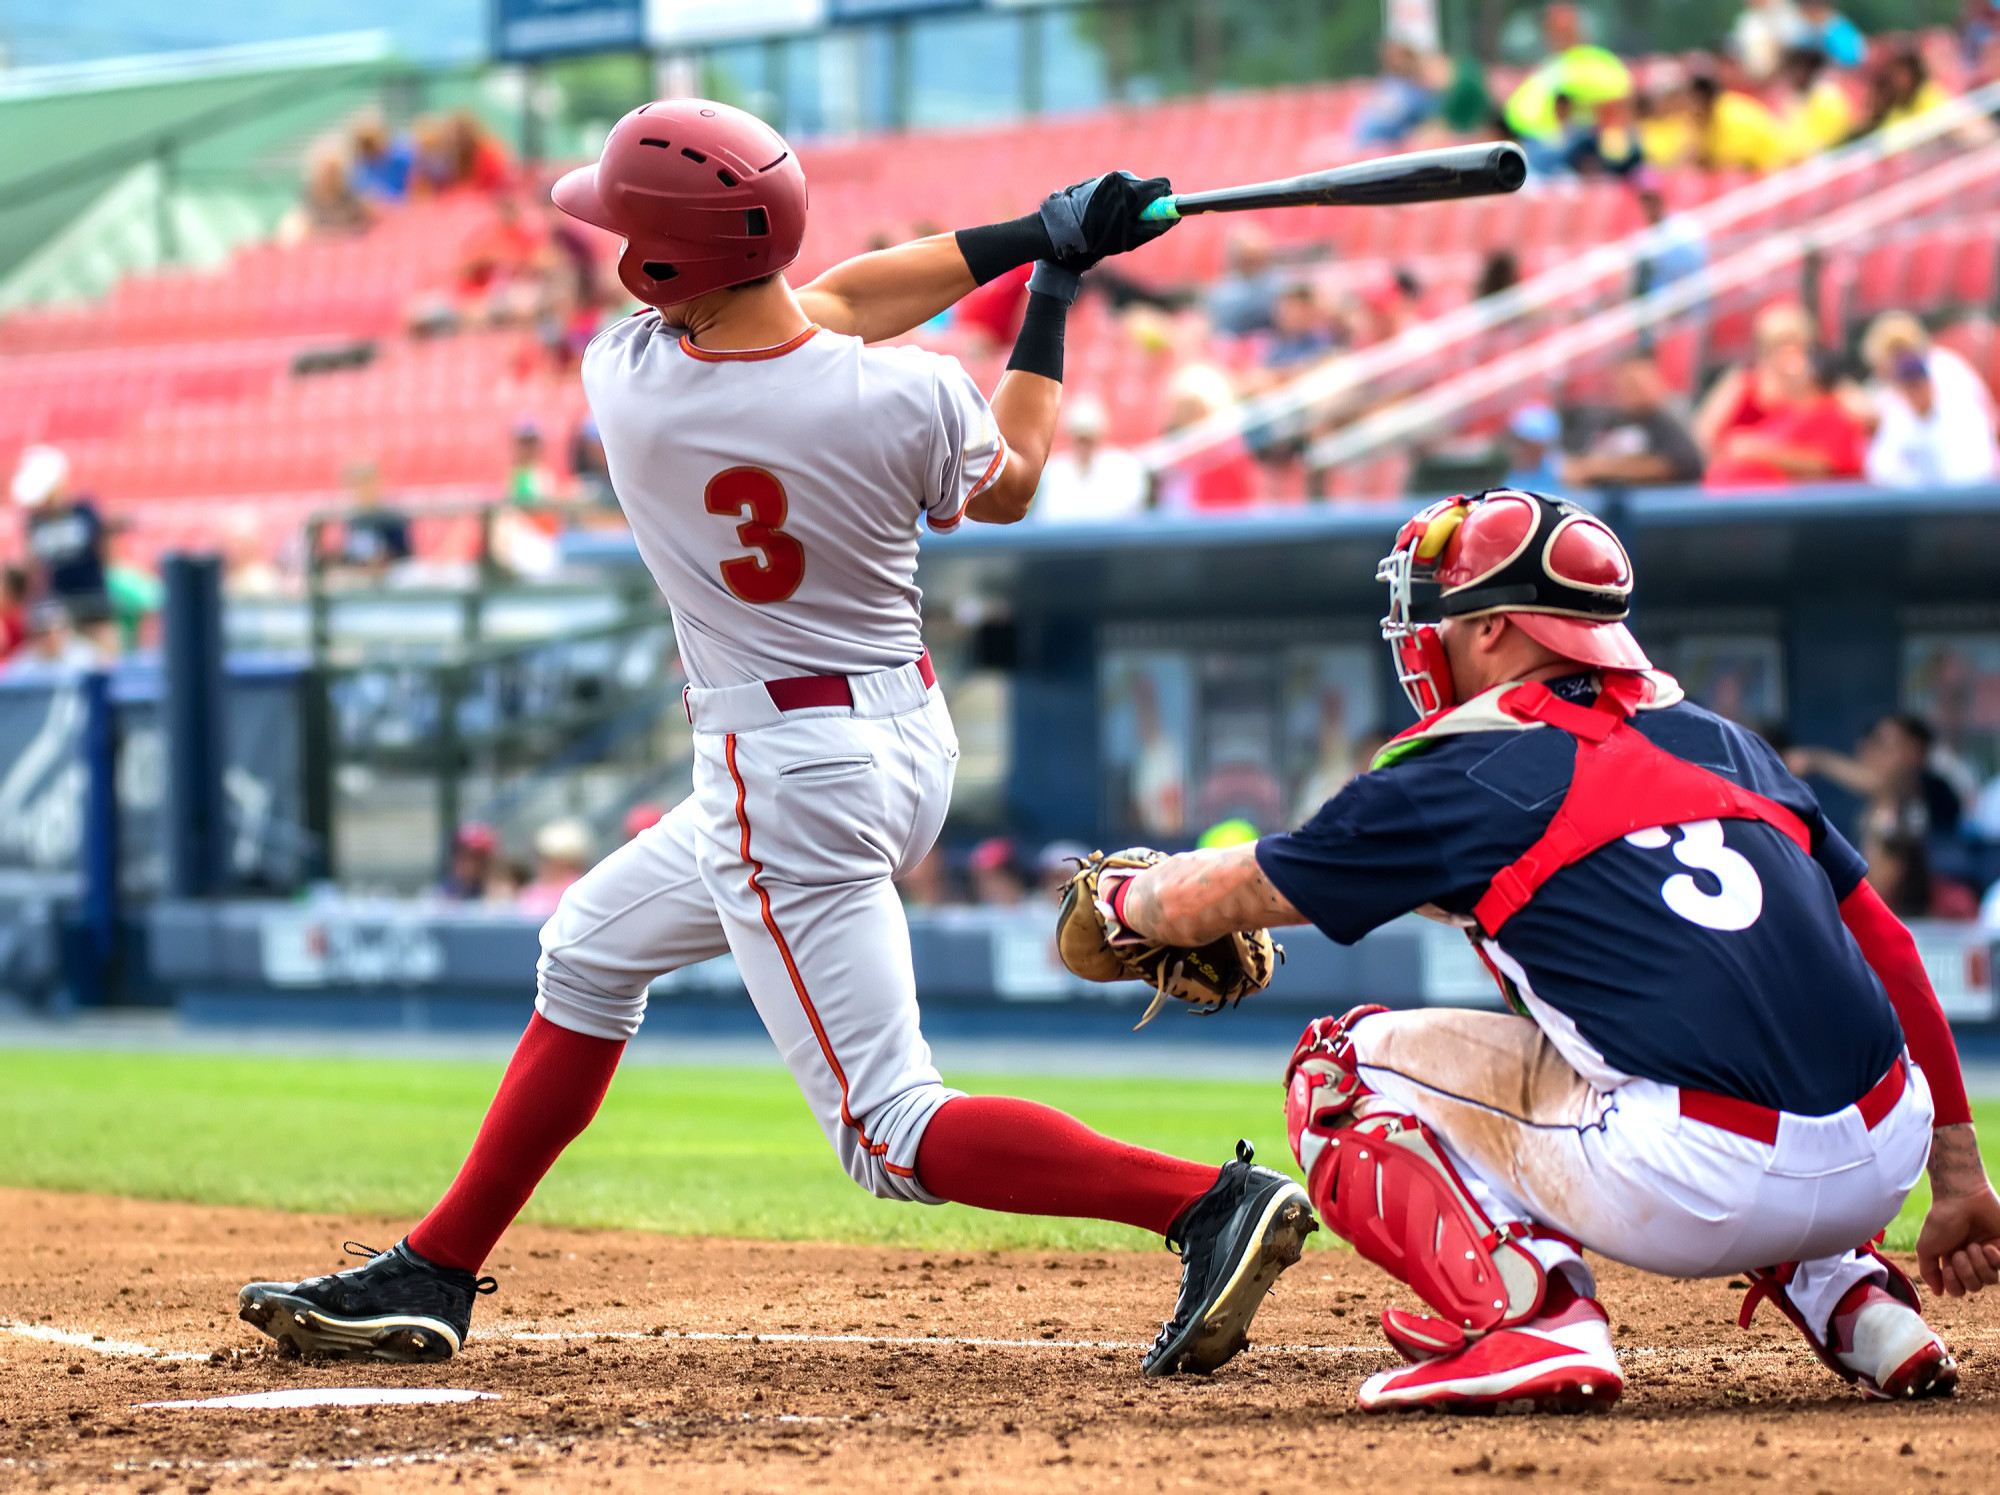 Baseball Tournament Preparation Tips: How to Prep for the Ball Games